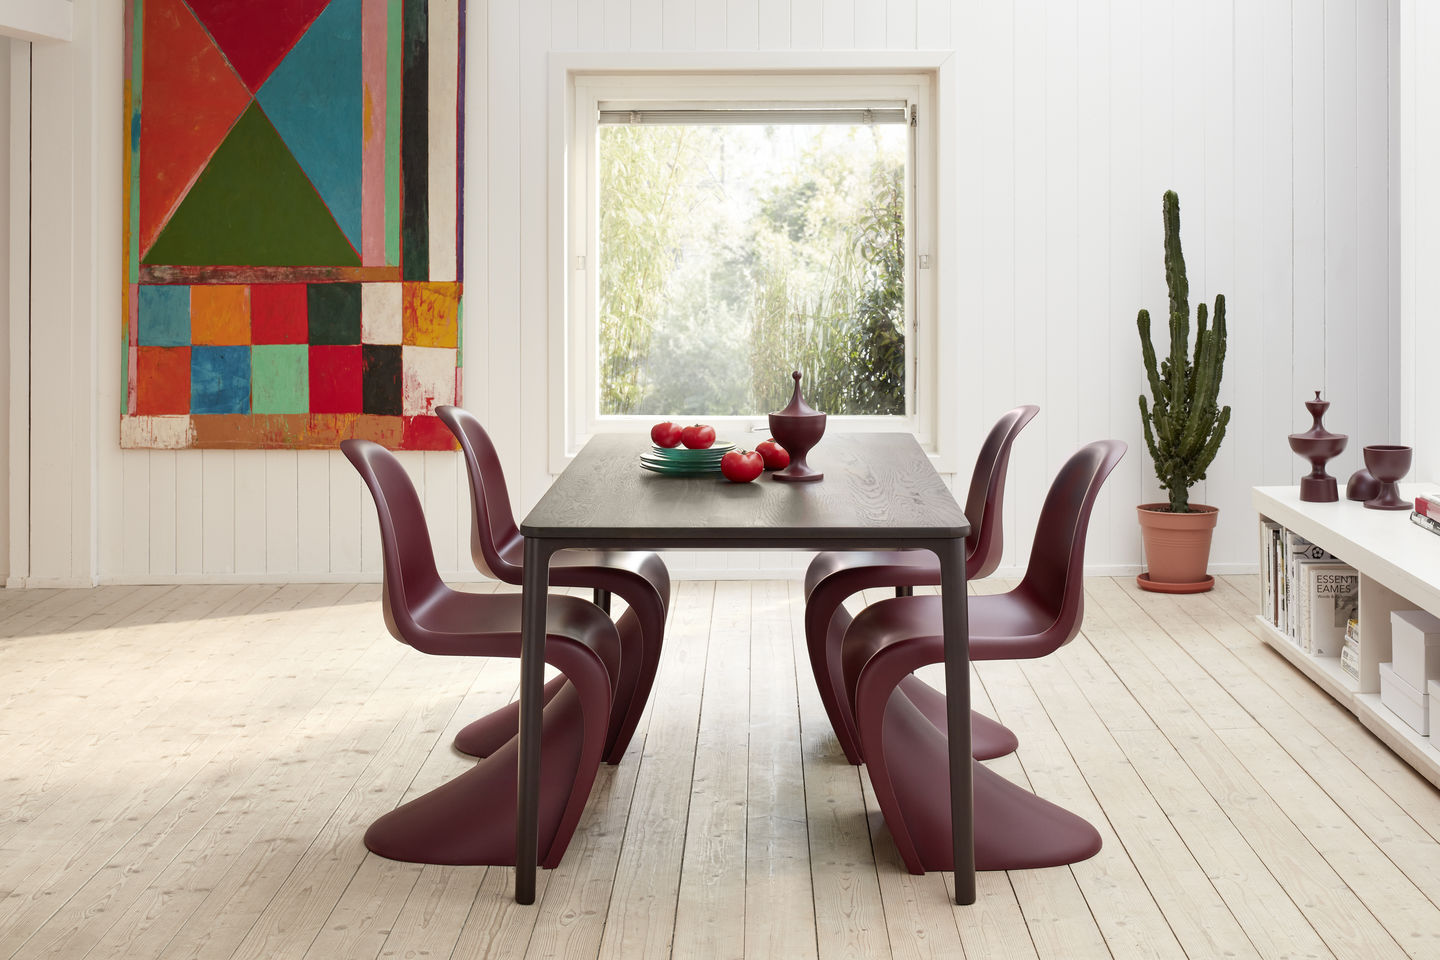 Vitra Plate Dining Table, Panton, Ceramic Containers